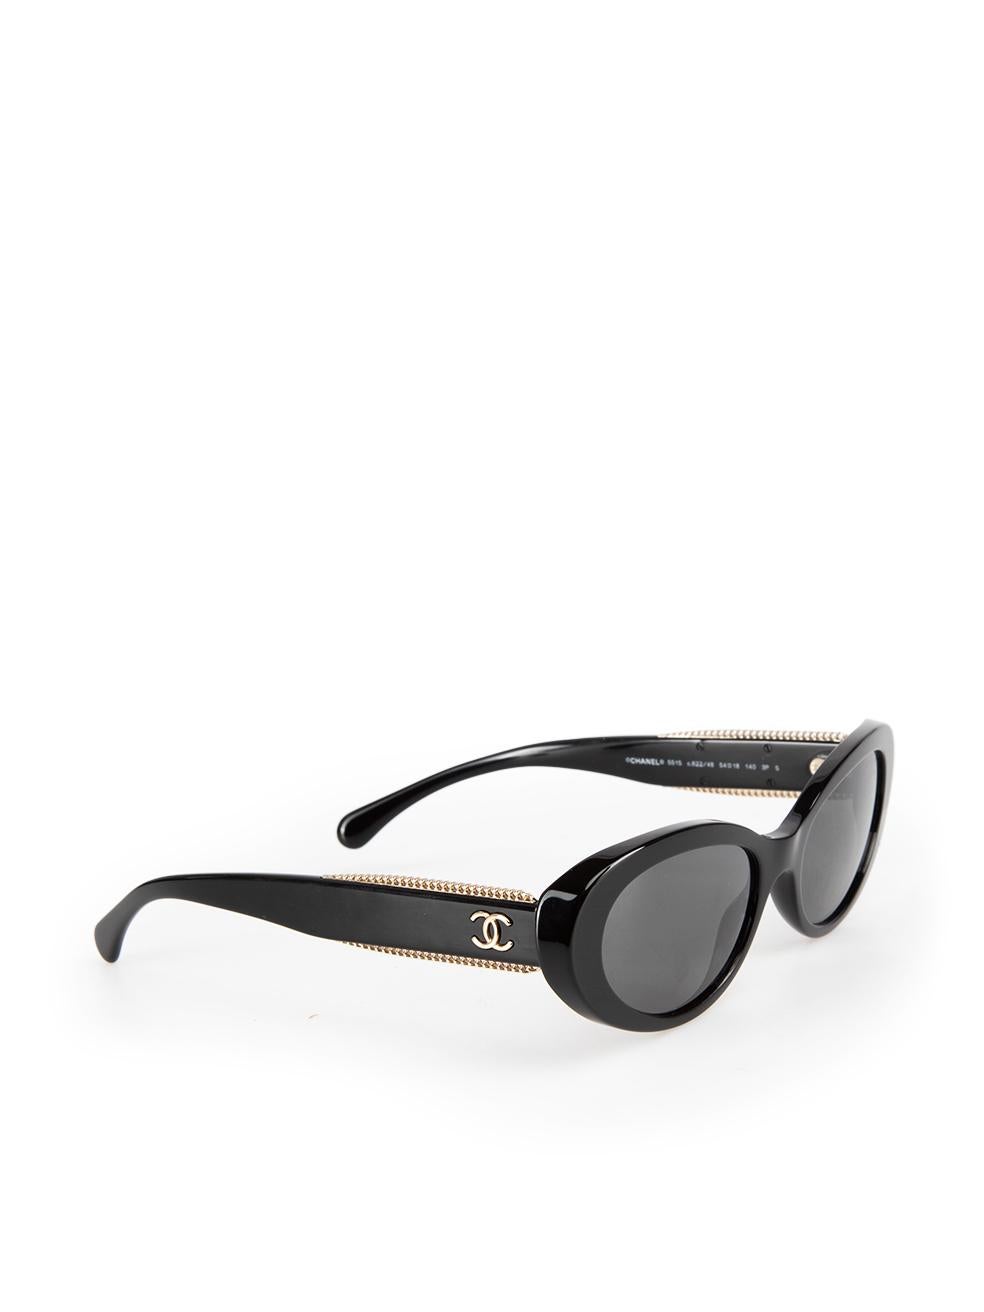 Chanel Black Oval Sunglasses In New Condition For Sale In London, GB